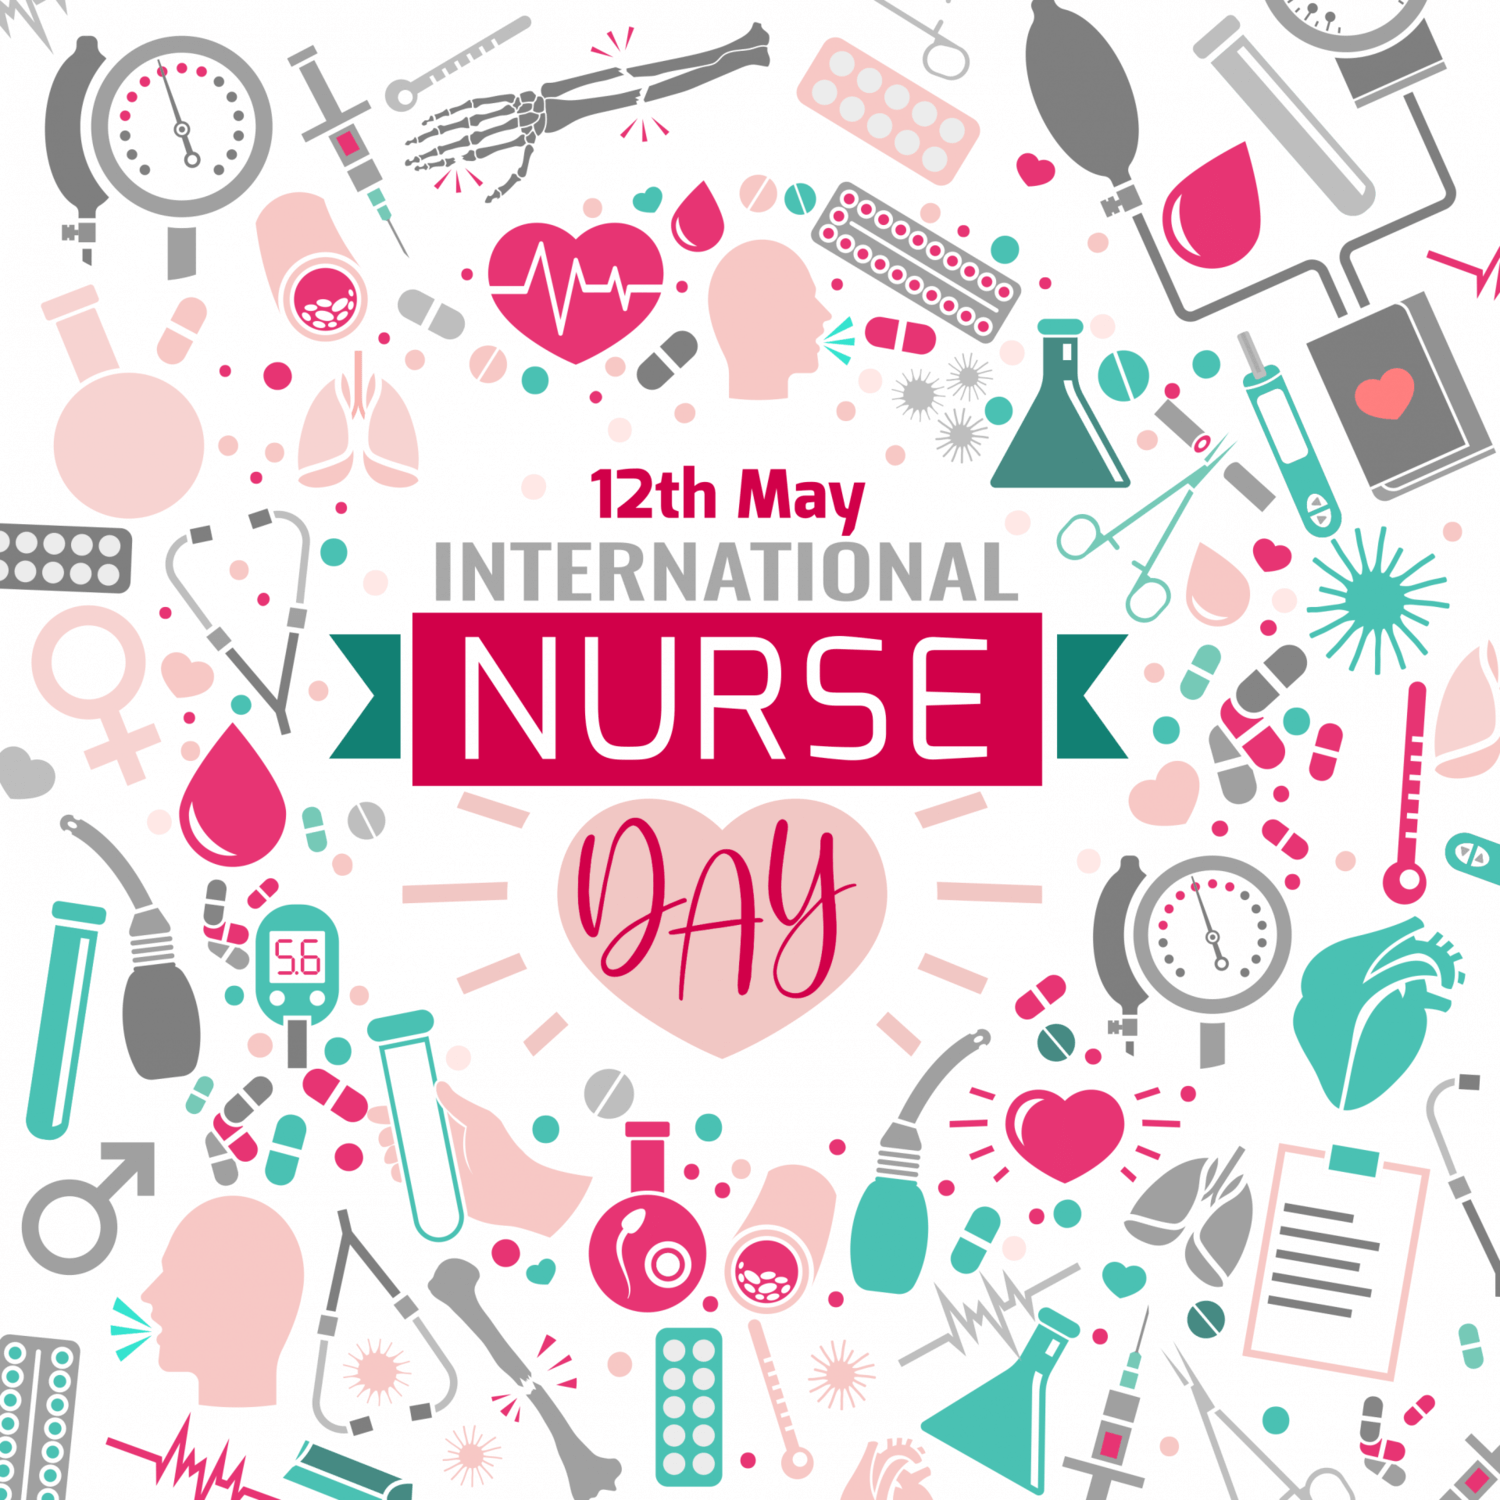 Happy International Nurses Day 2021 Wishes, Image, Quotes, Messages & Theme